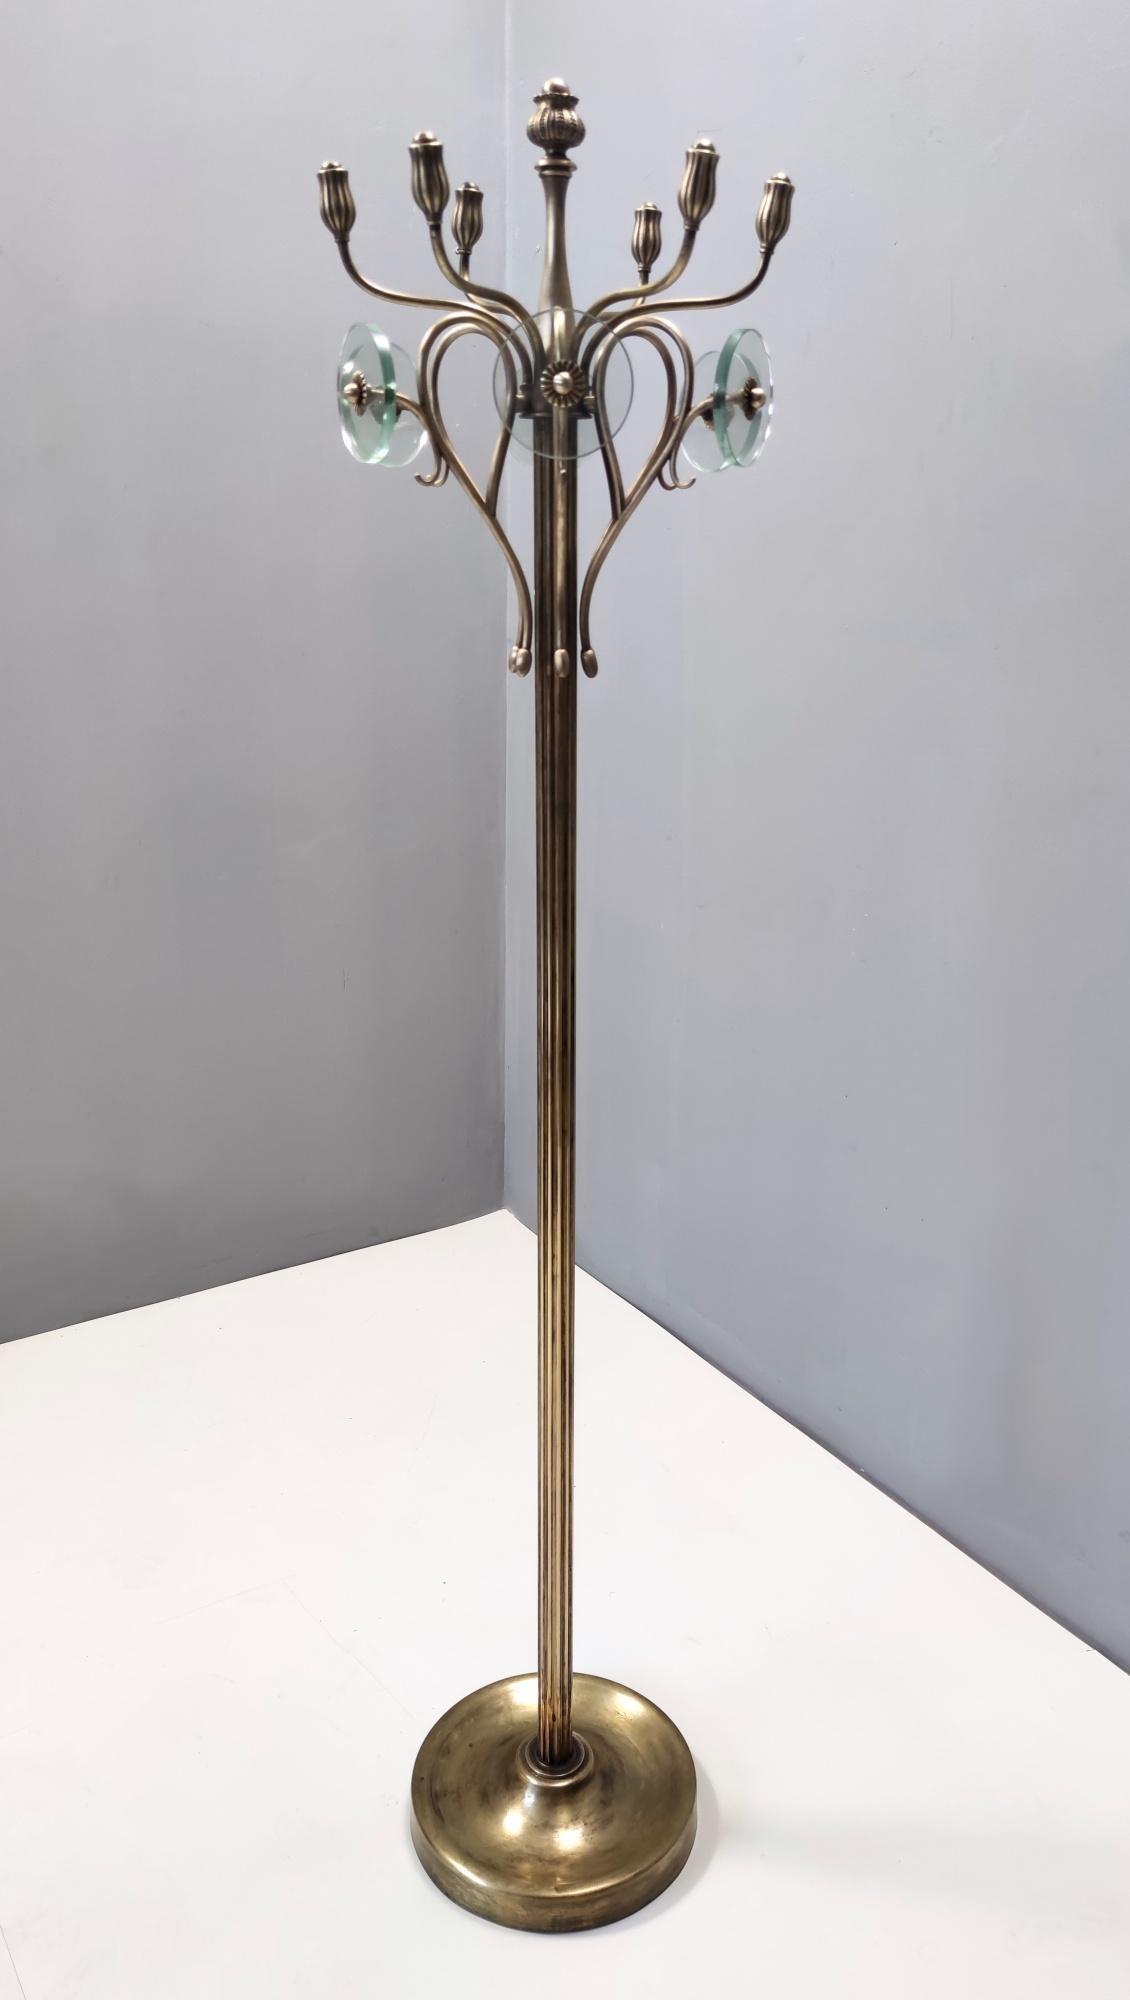 Vintage Revolving Brass and Glass Coat Rack Ascribable to Fontana Arte, Italy In Good Condition For Sale In Bresso, Lombardy